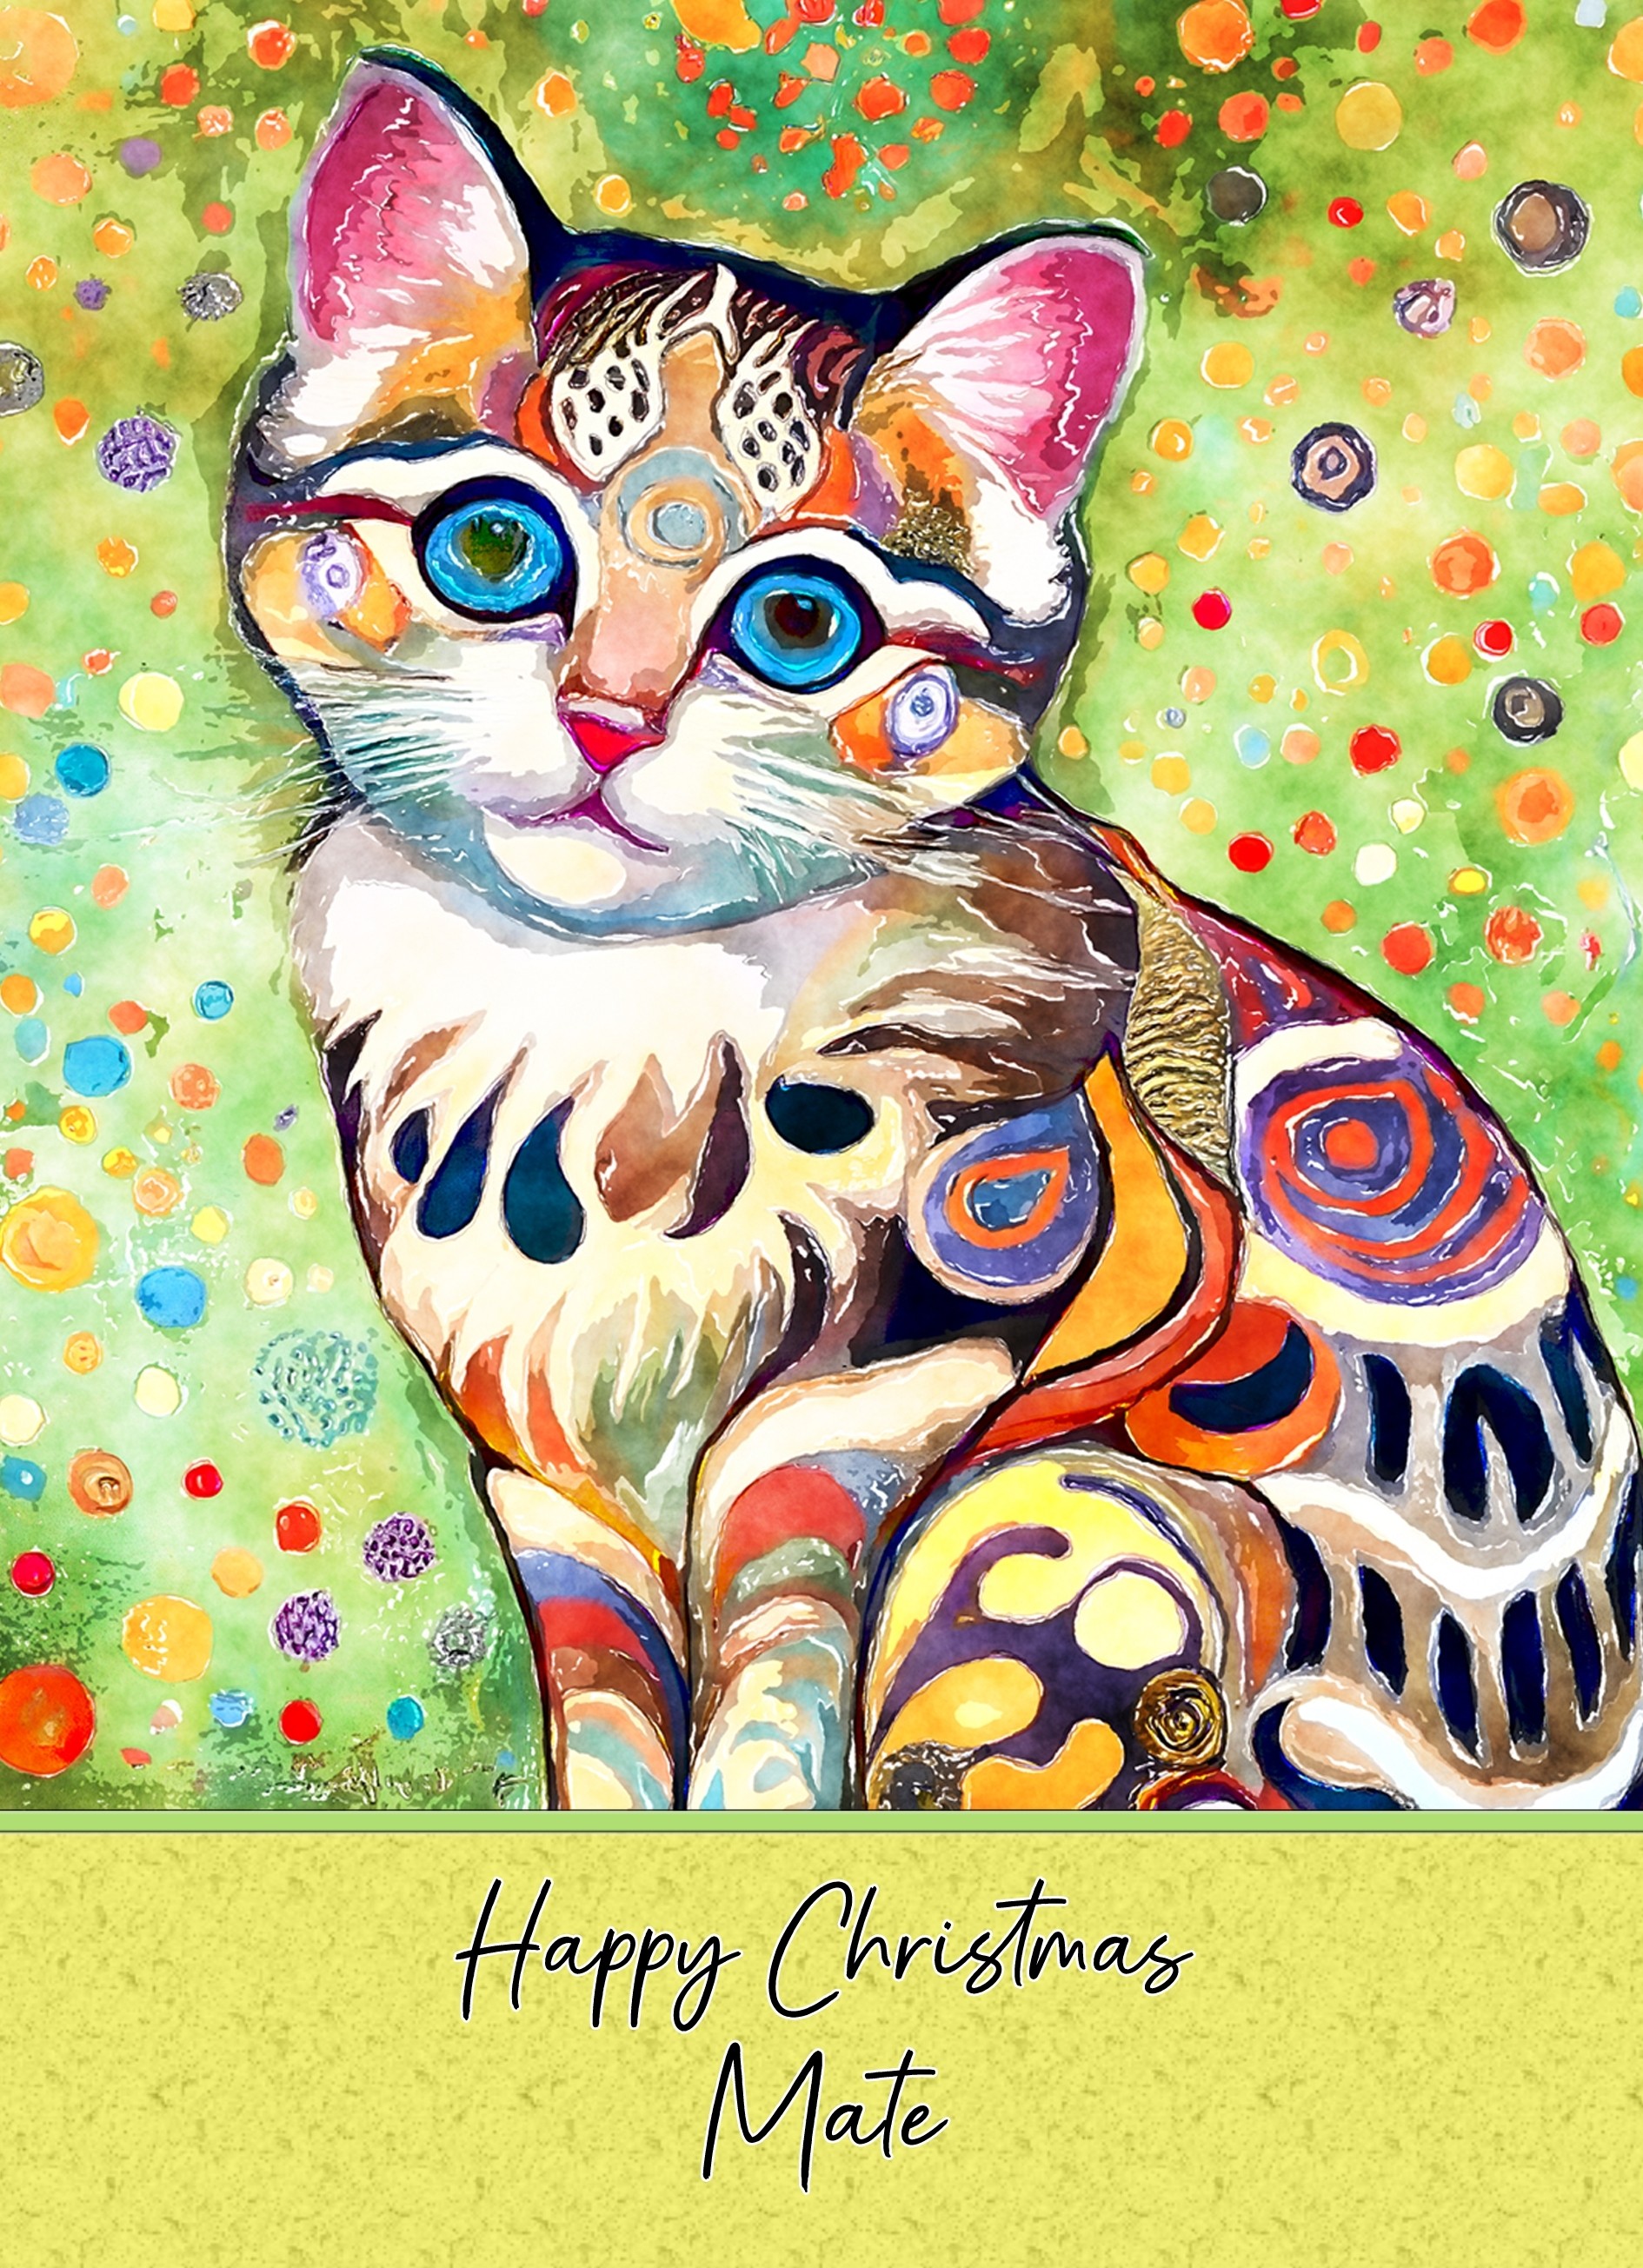 Christmas Card For Mate (Cat Art Painting)